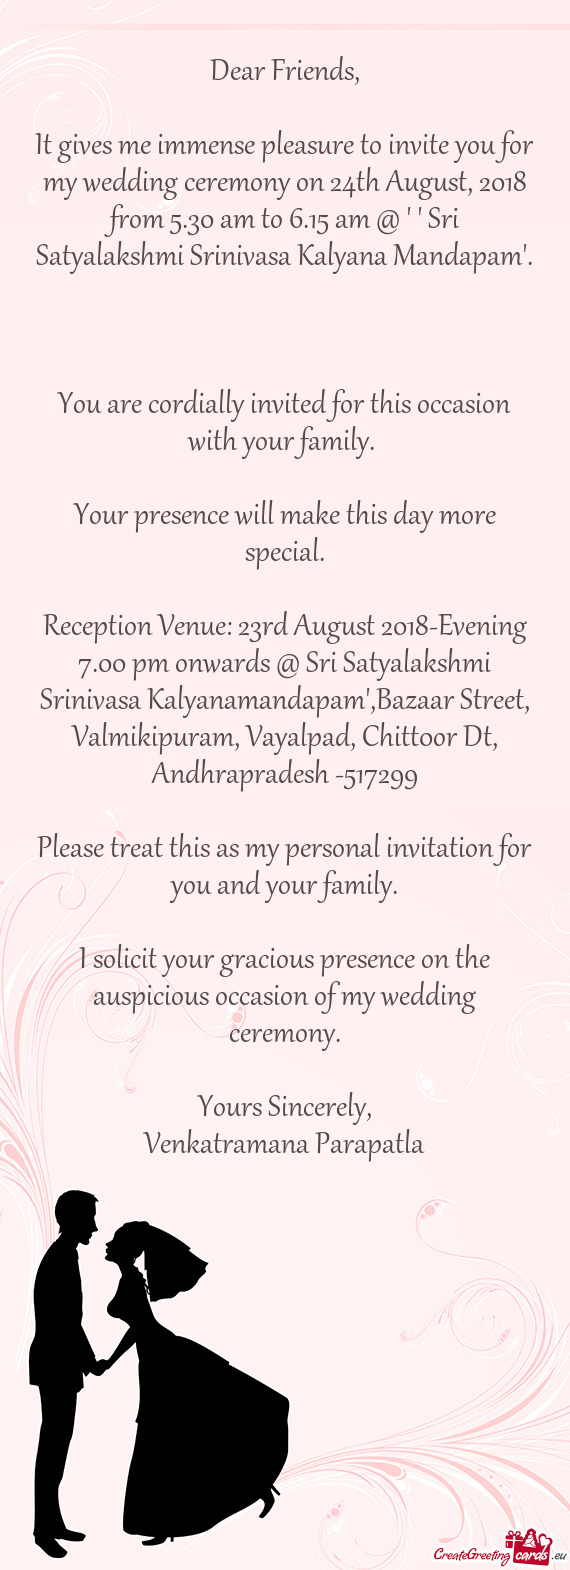 It gives me immense pleasure to invite you for my wedding ceremony on 24th August, 2018 from 5.30 am